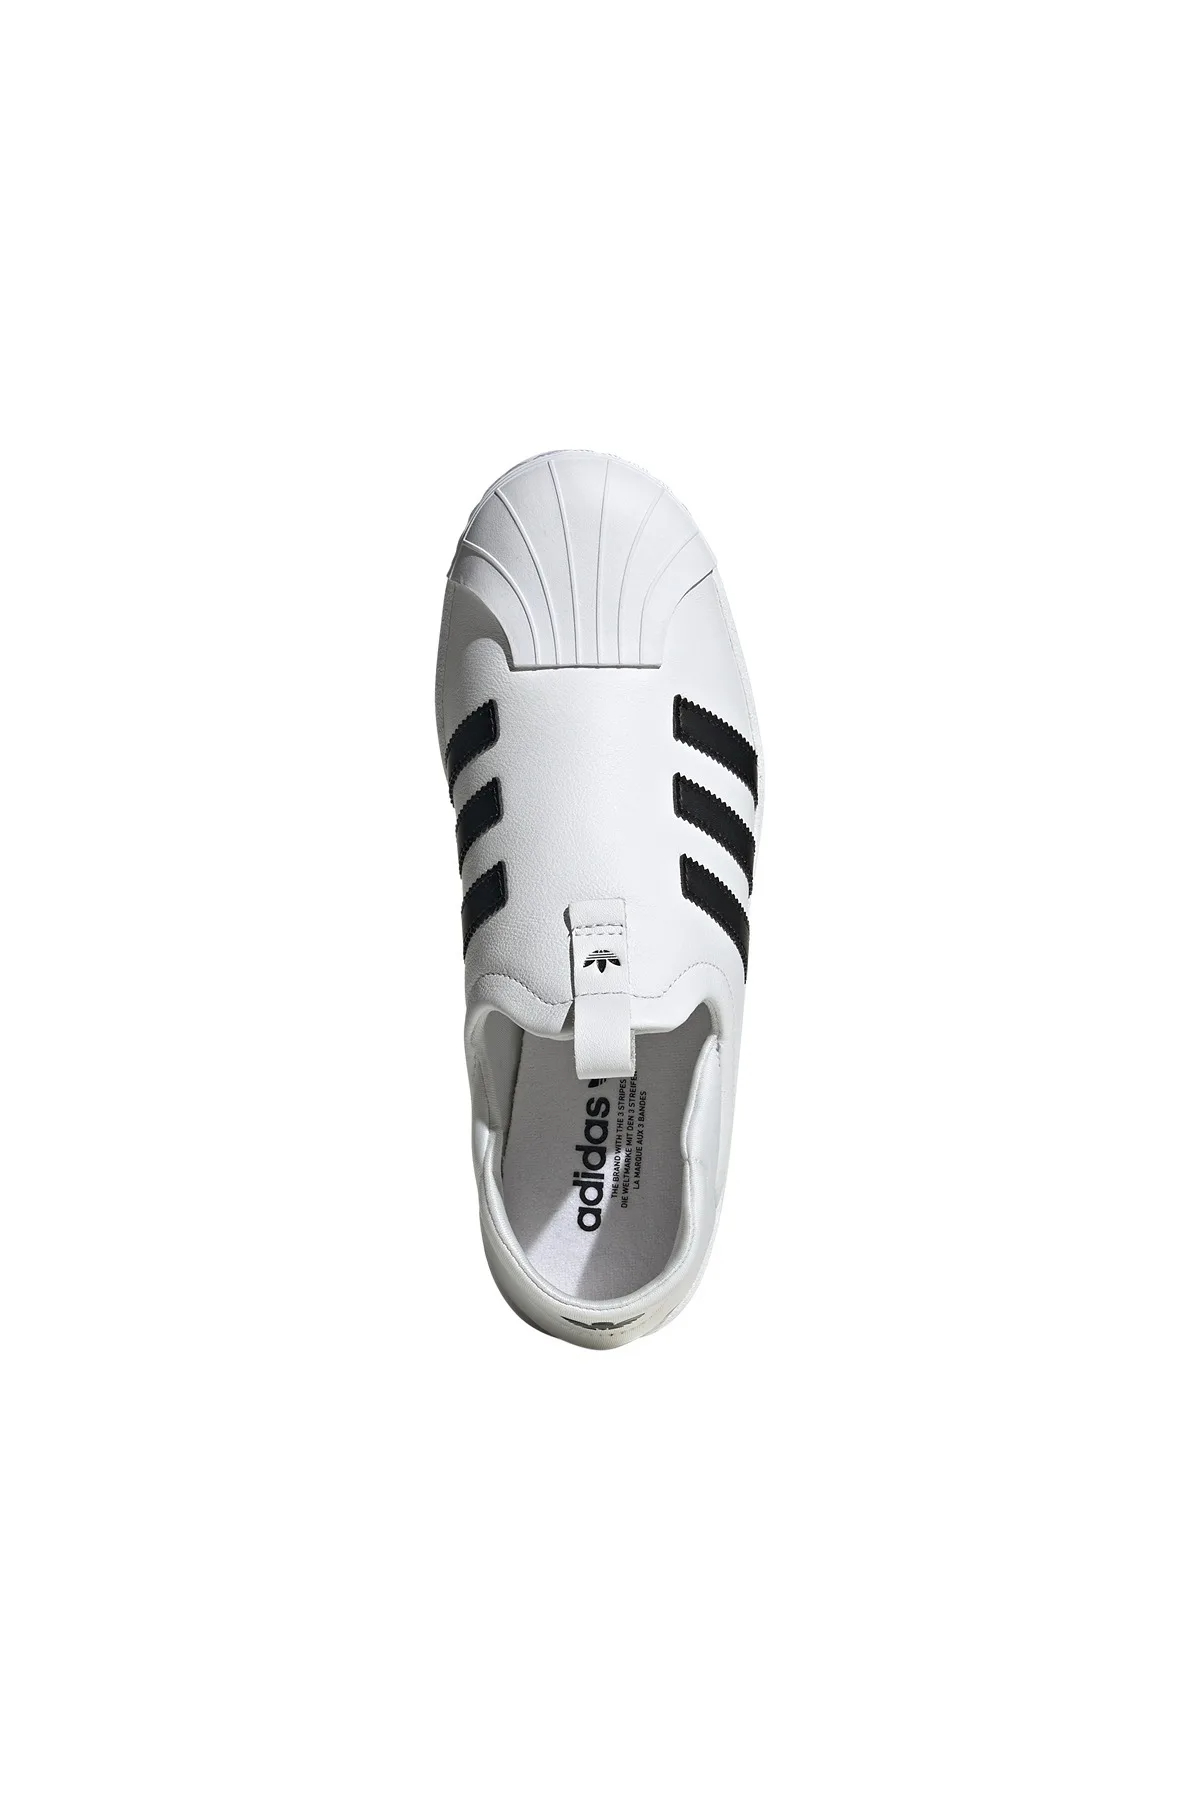 Women’s adidas slip on shoes: The Fusion of Comfort and Style插图3